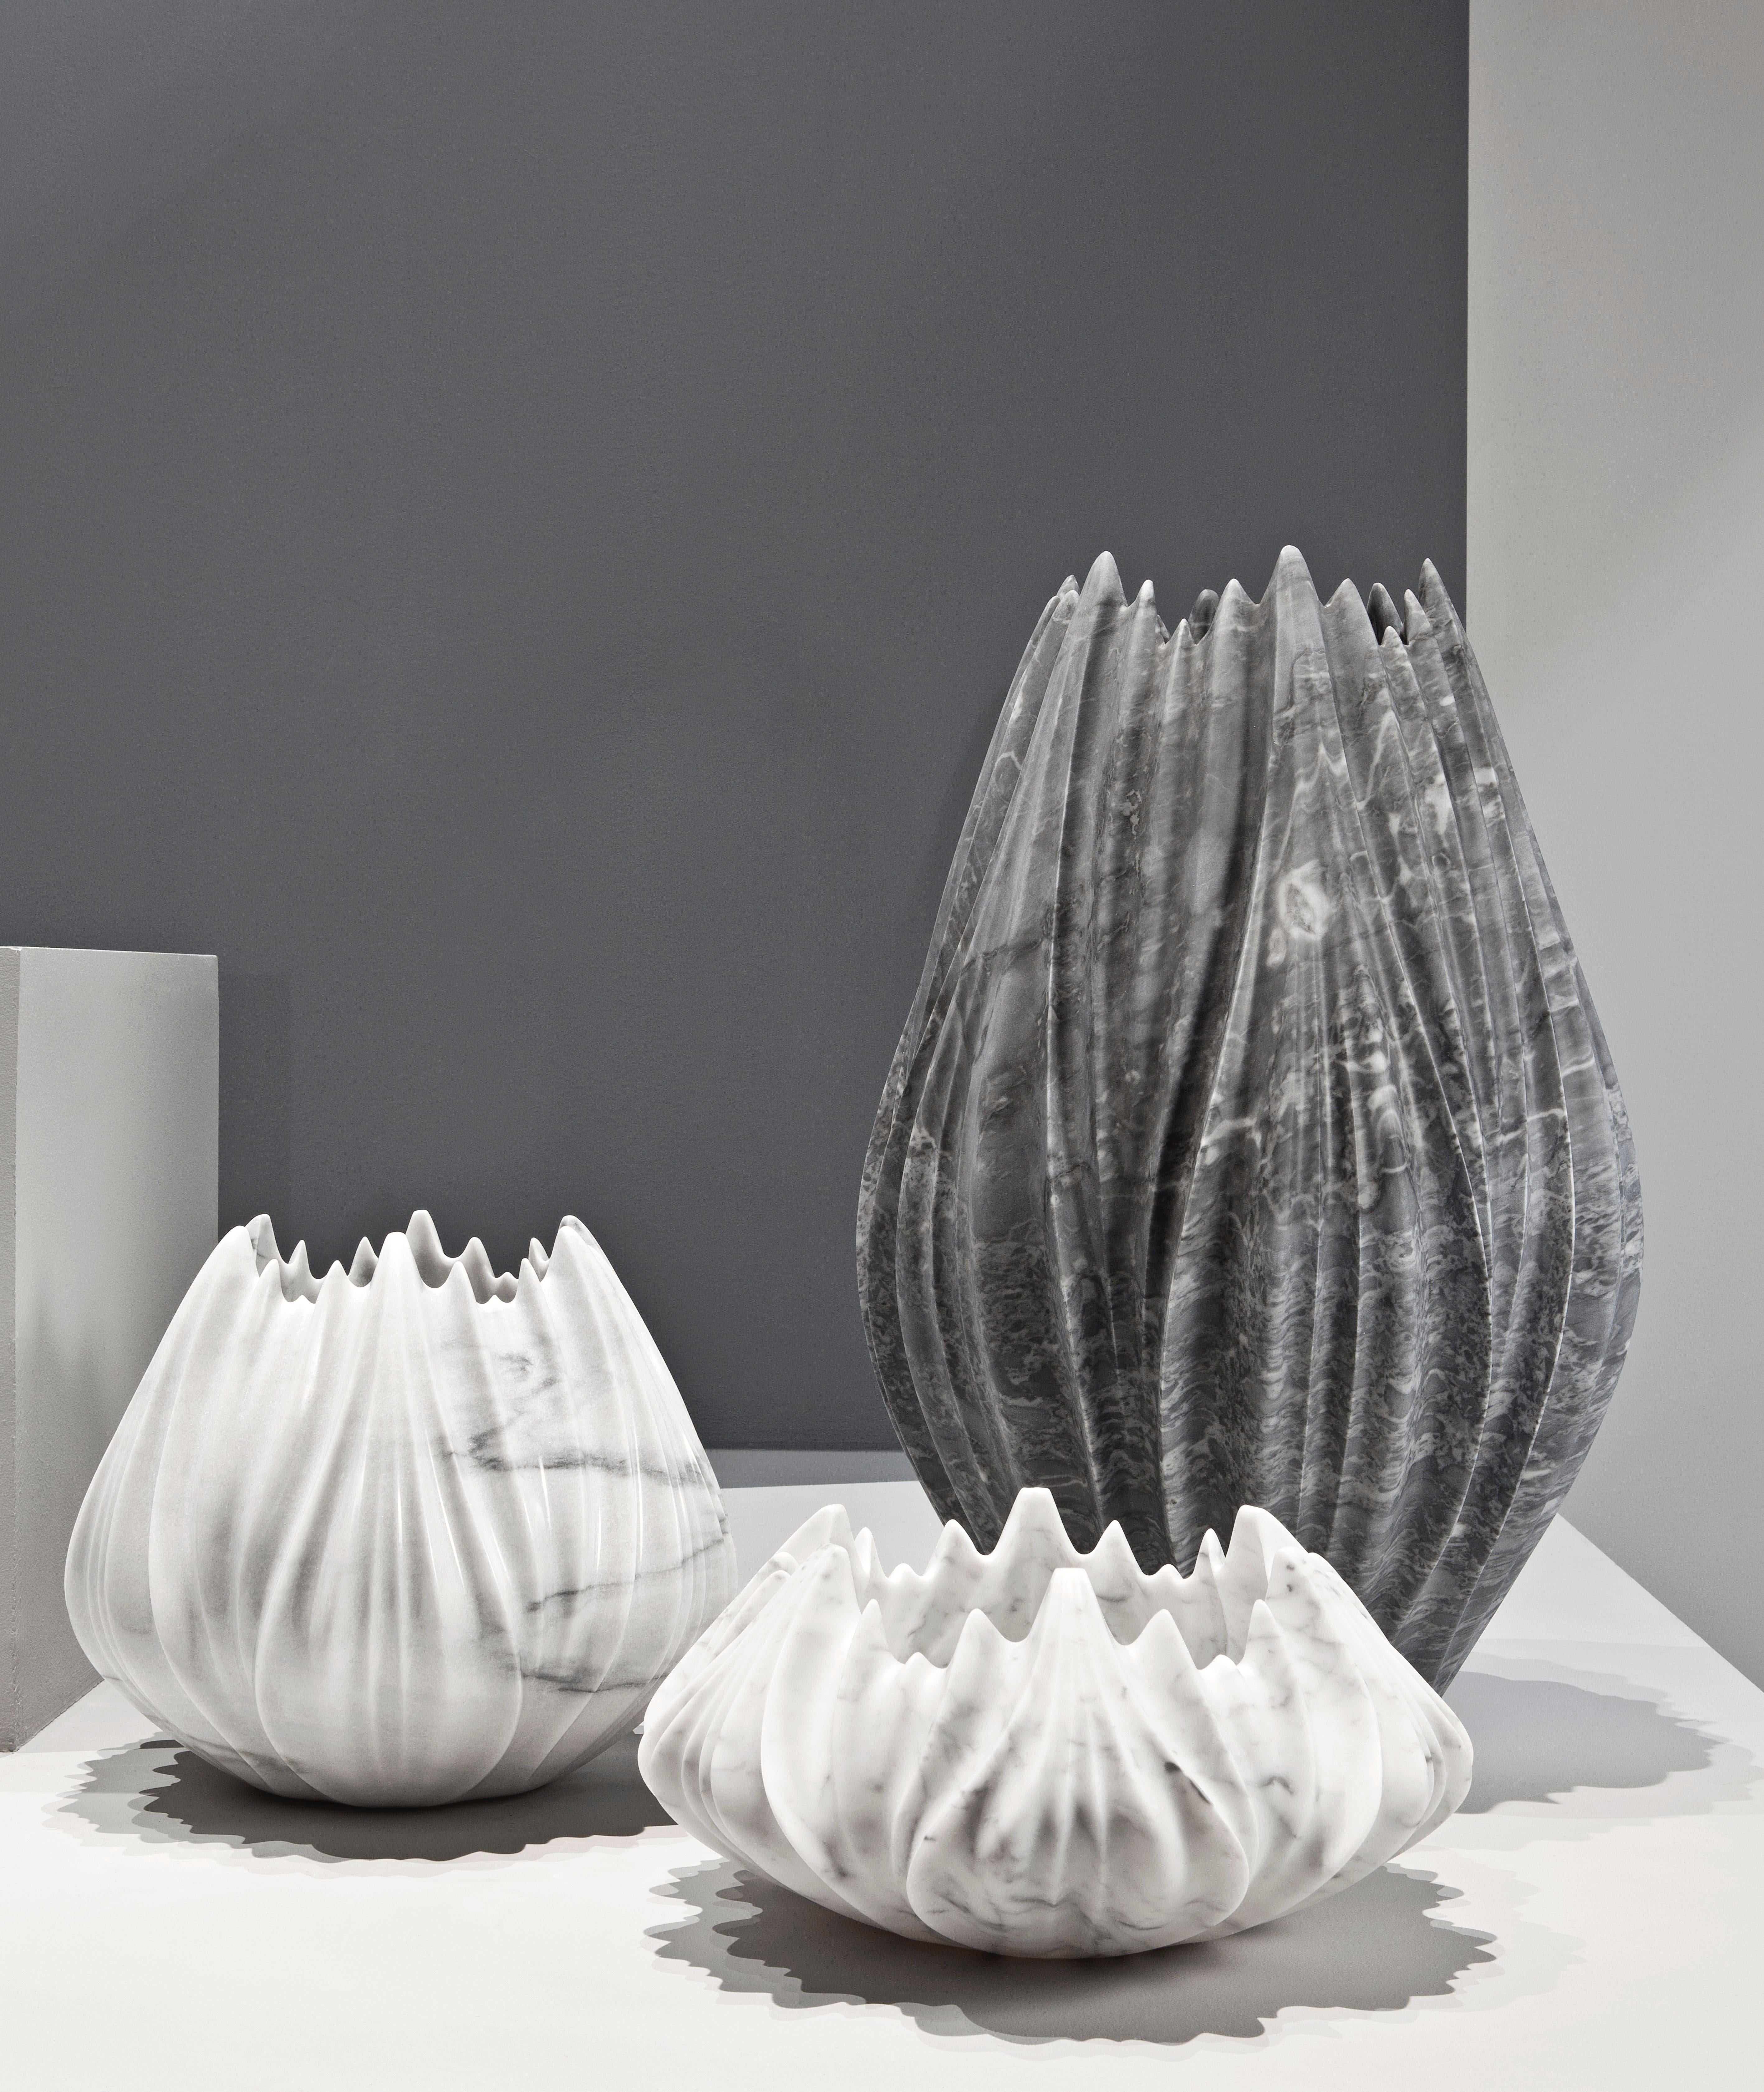 Created by Zaha Hadid in Honed in Bardiglio Nuvolato. This series includes 4 other designs. Limited edition of 24.

The Tau vases created by Zaha Hadid appear organic; emerging as a series of intricately rendered pleats expressing the formal